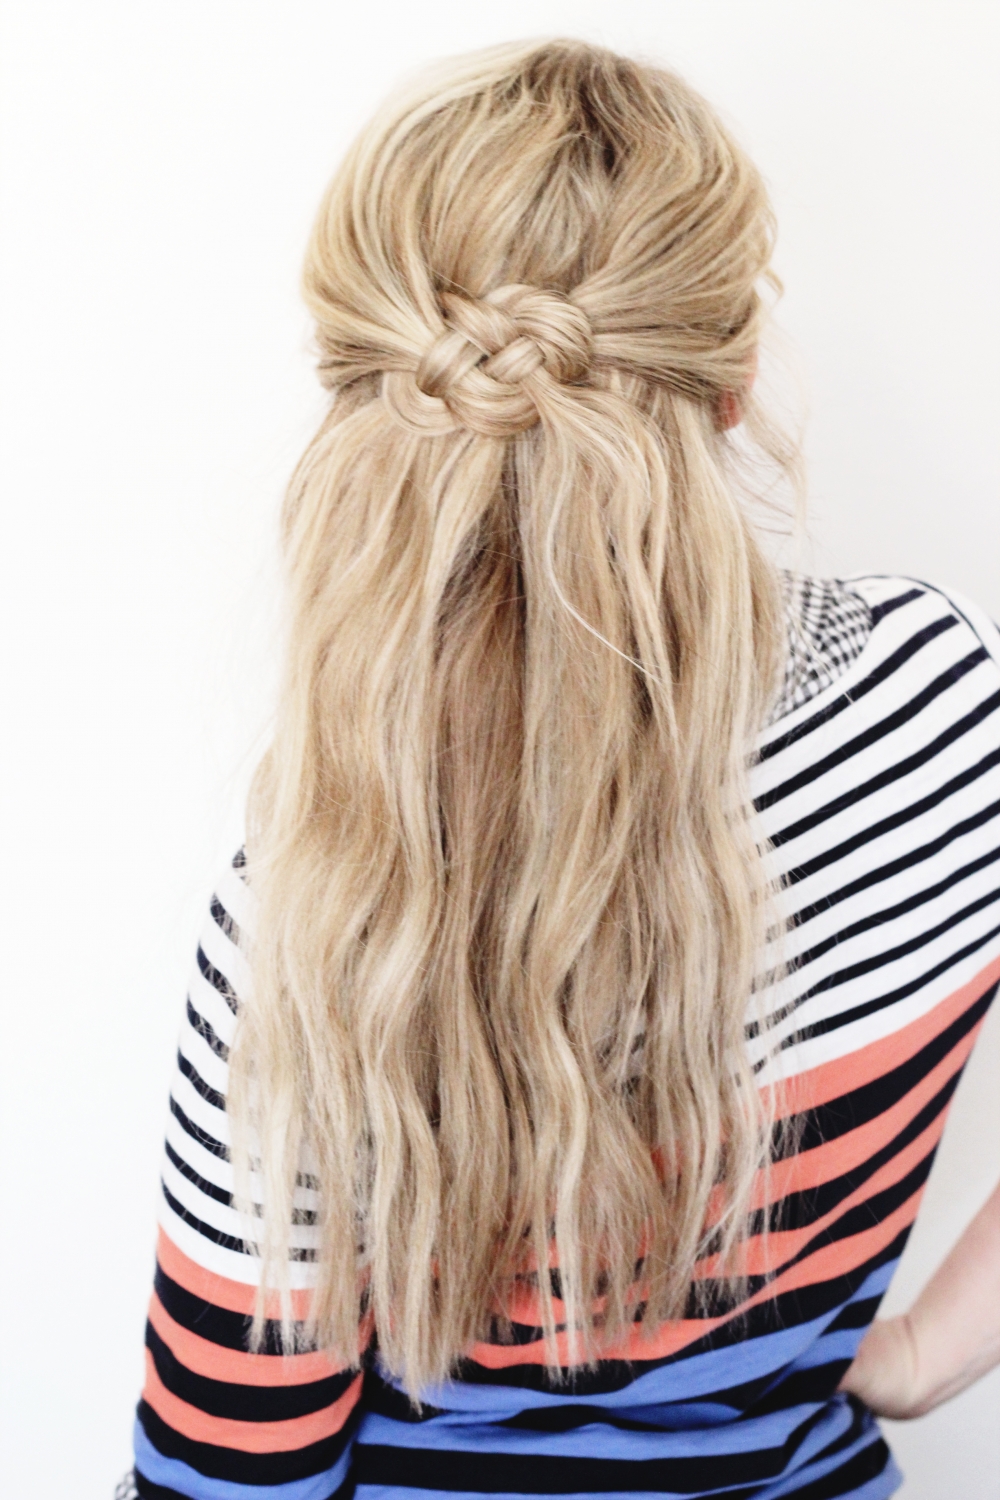 Hair Knots How-To Guide For Styling Summer 2013 | Hair knot, Messy  hairstyles, Hairstyle